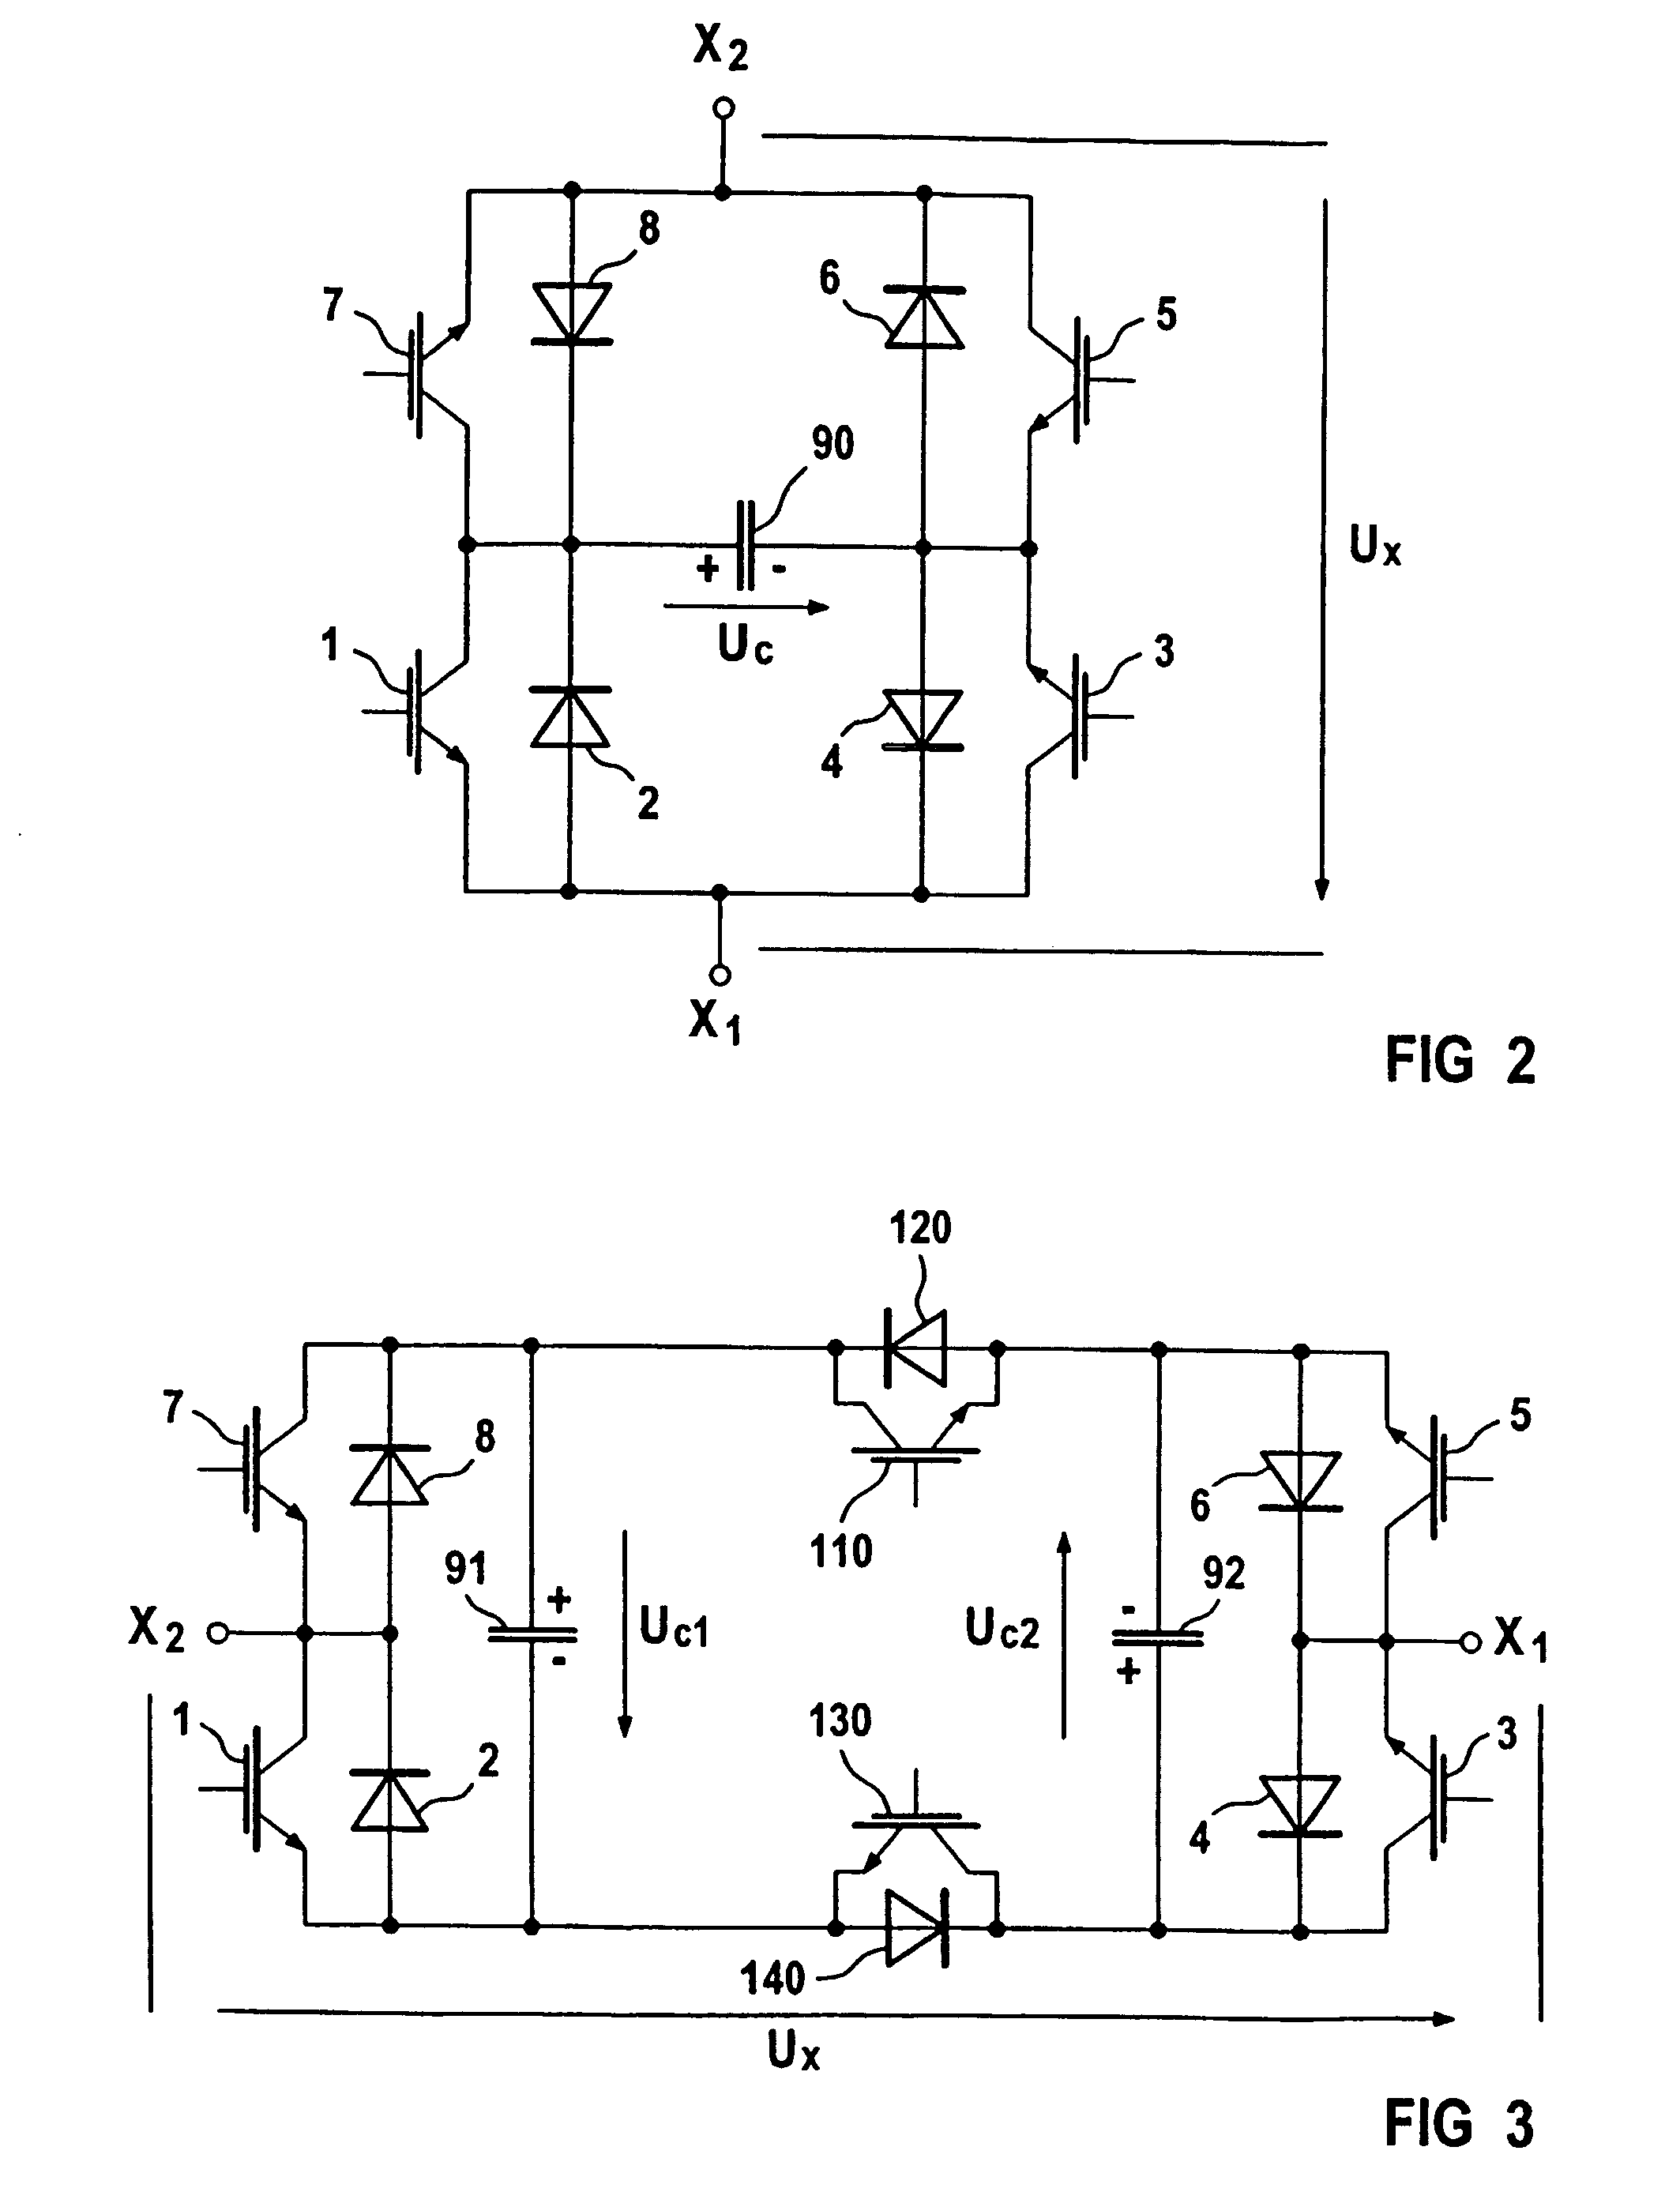 Power supply with a direct converter